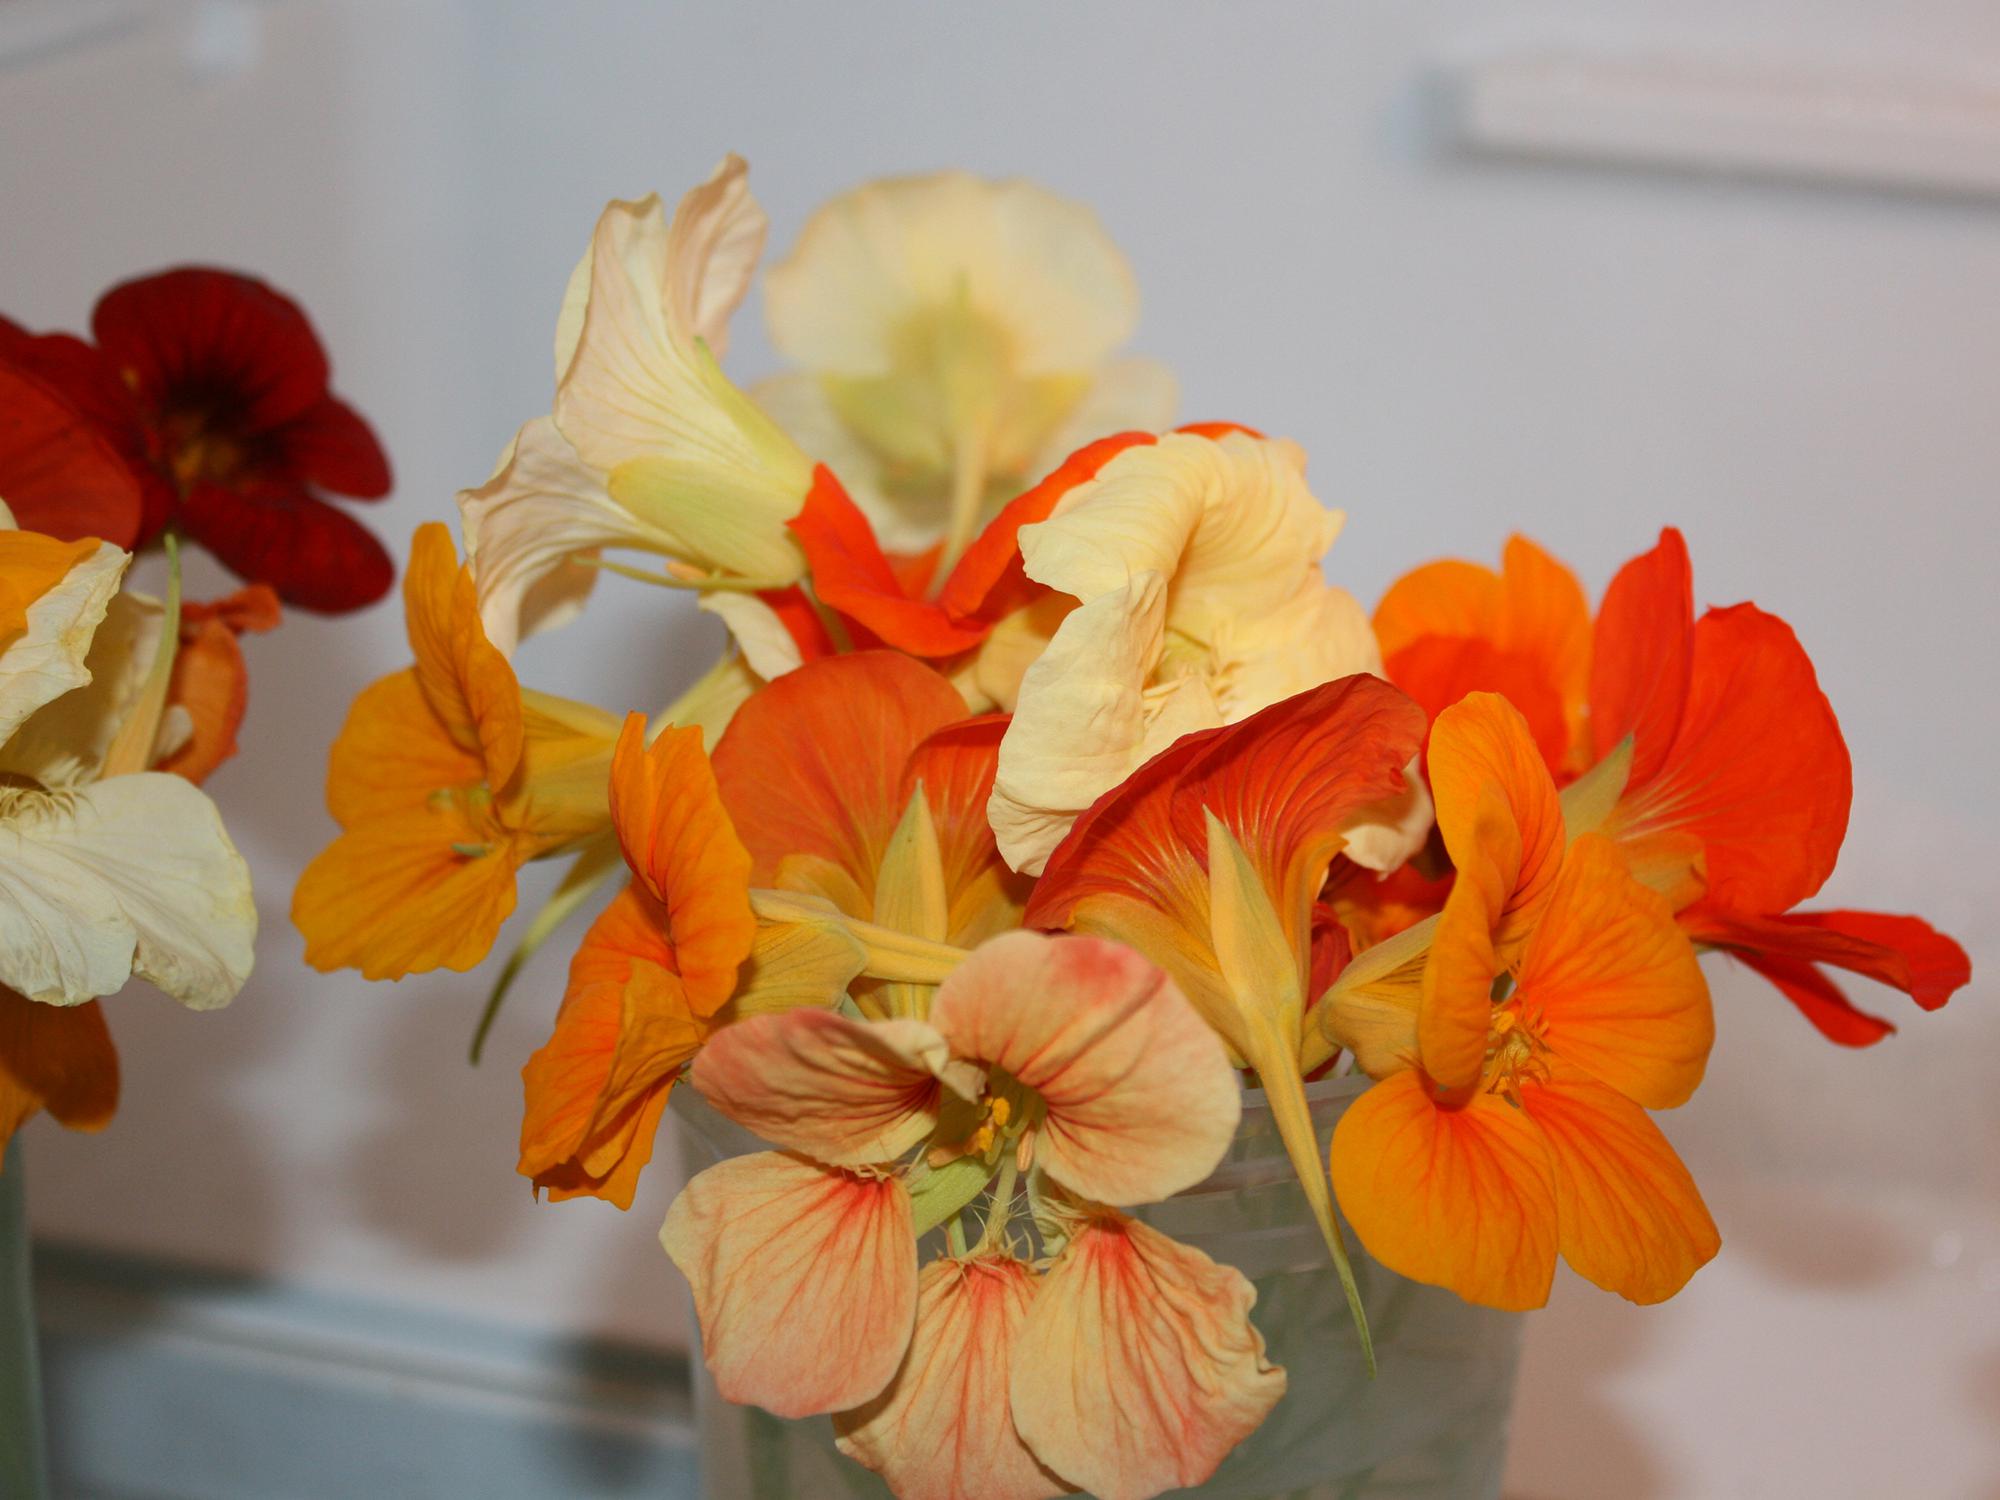 A bouquet of small, orange and yellow flowers.